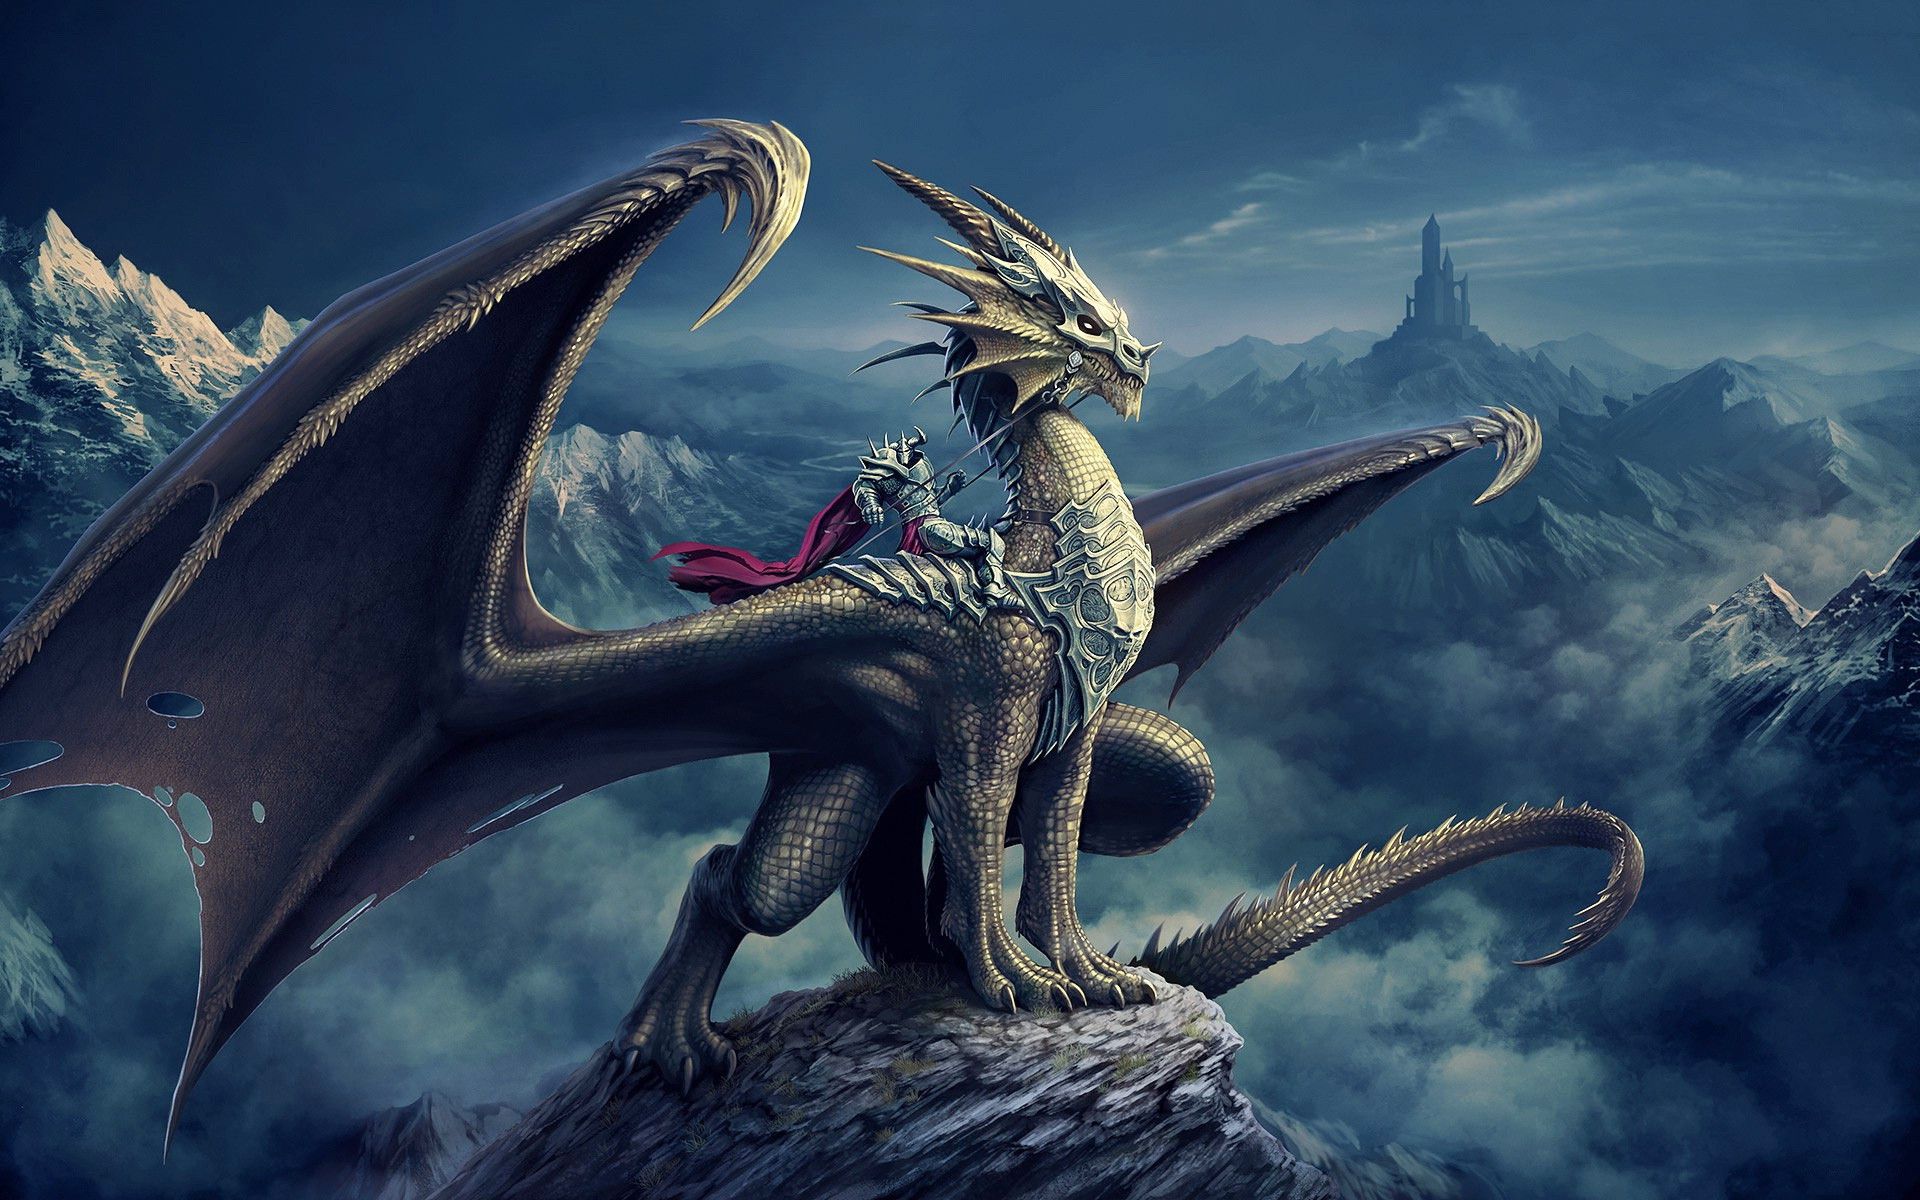 Dragon Images Wallpapers - Wallpaper Cave